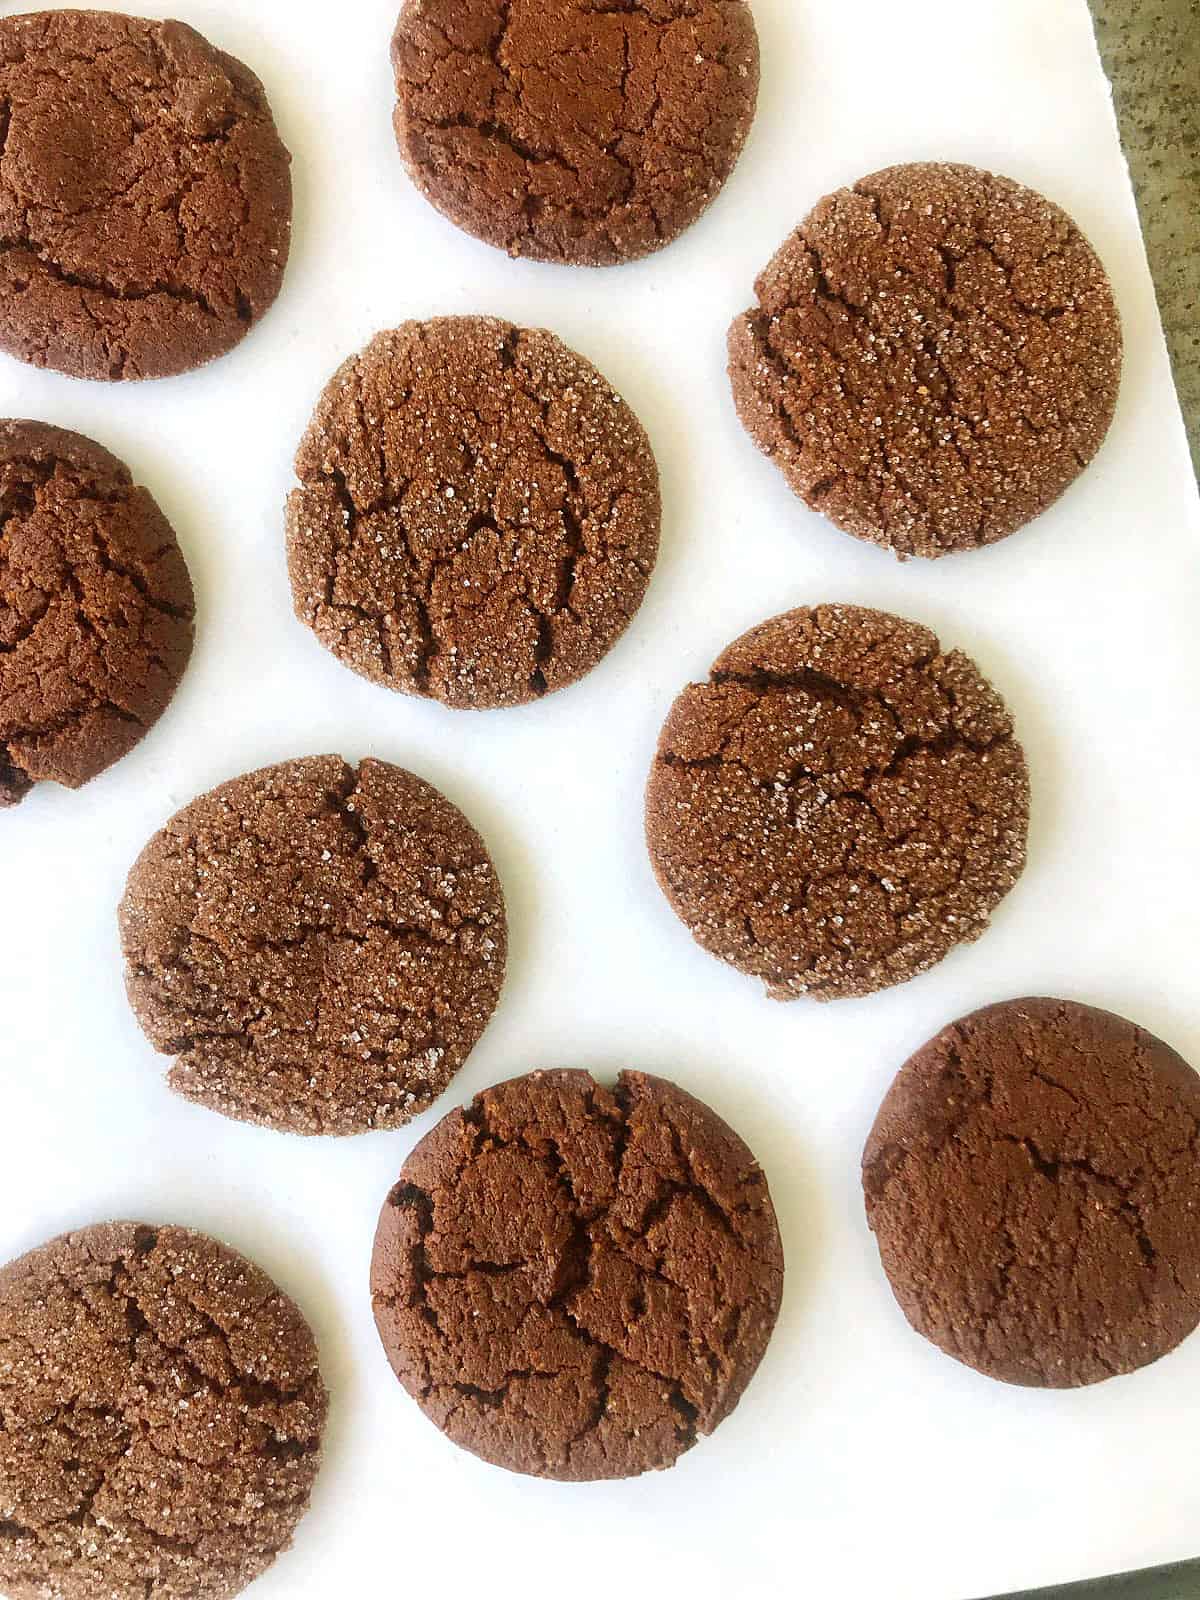 Flat view of dark cracked molasses cookies on white parchment paper.